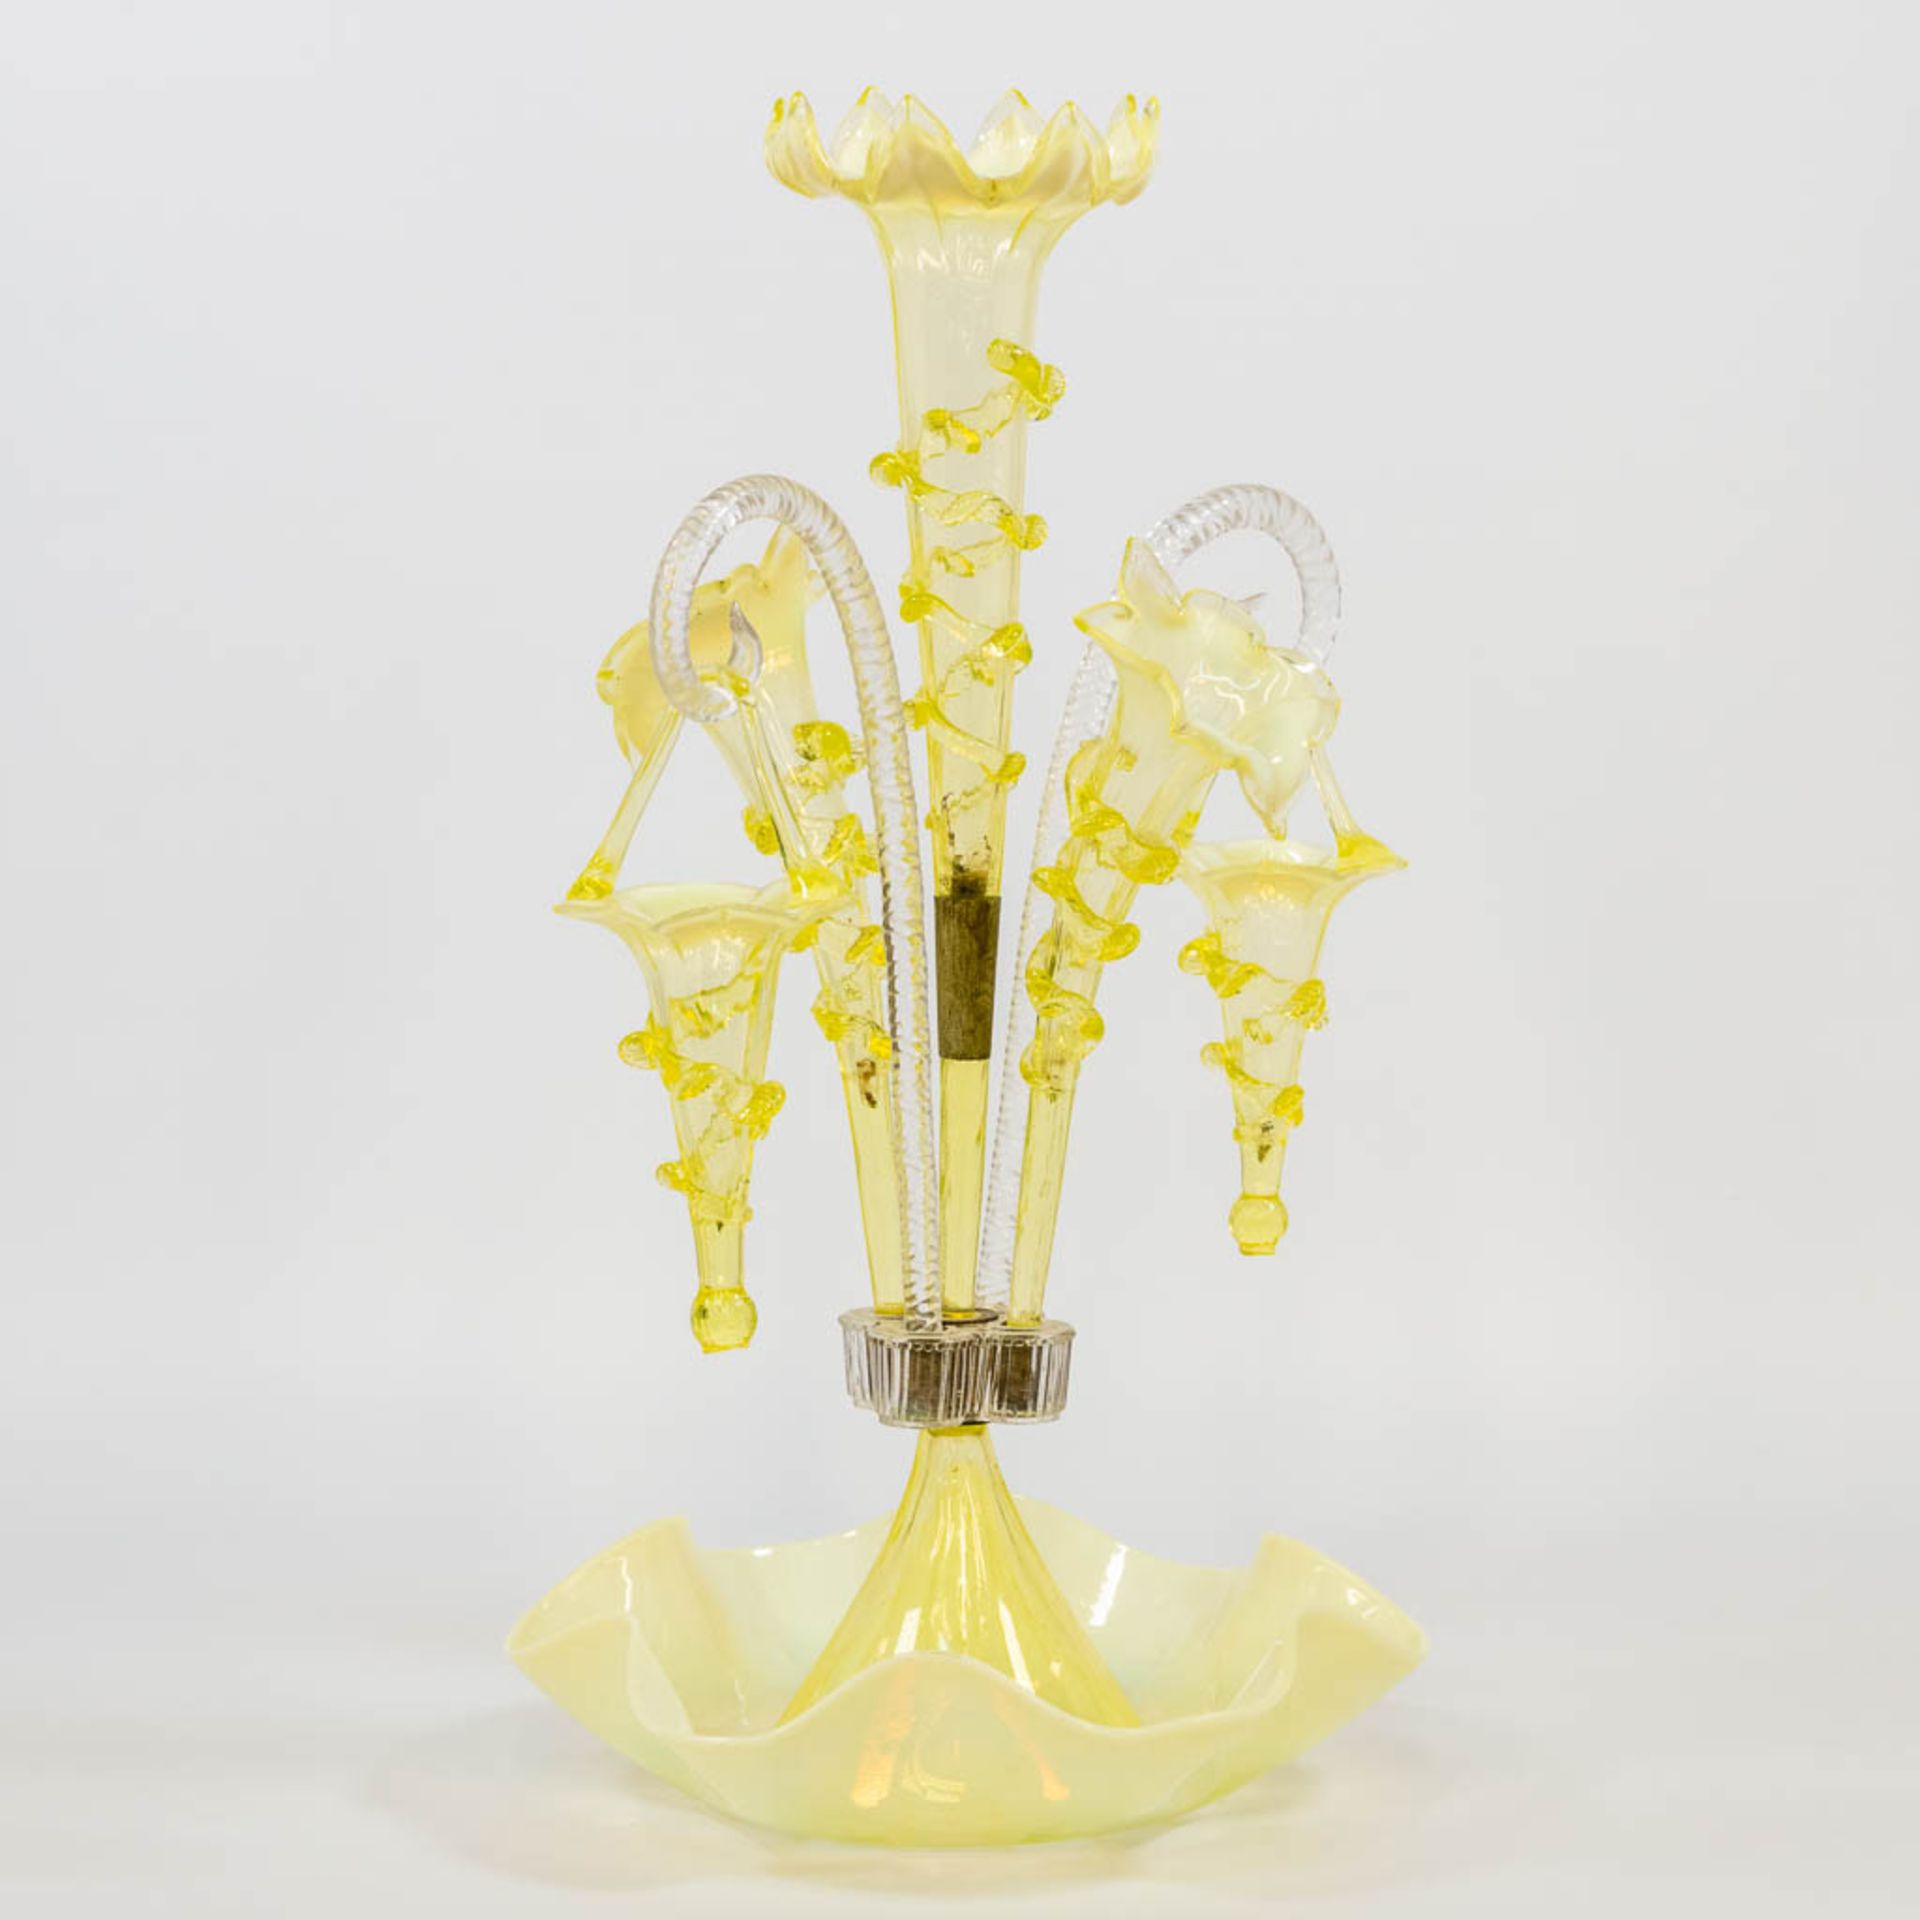 A yellow and clear glass table centrepiece pic-fleur, made in Murano, Italy. (25 x 28 x 45 cm) - Bild 13 aus 15